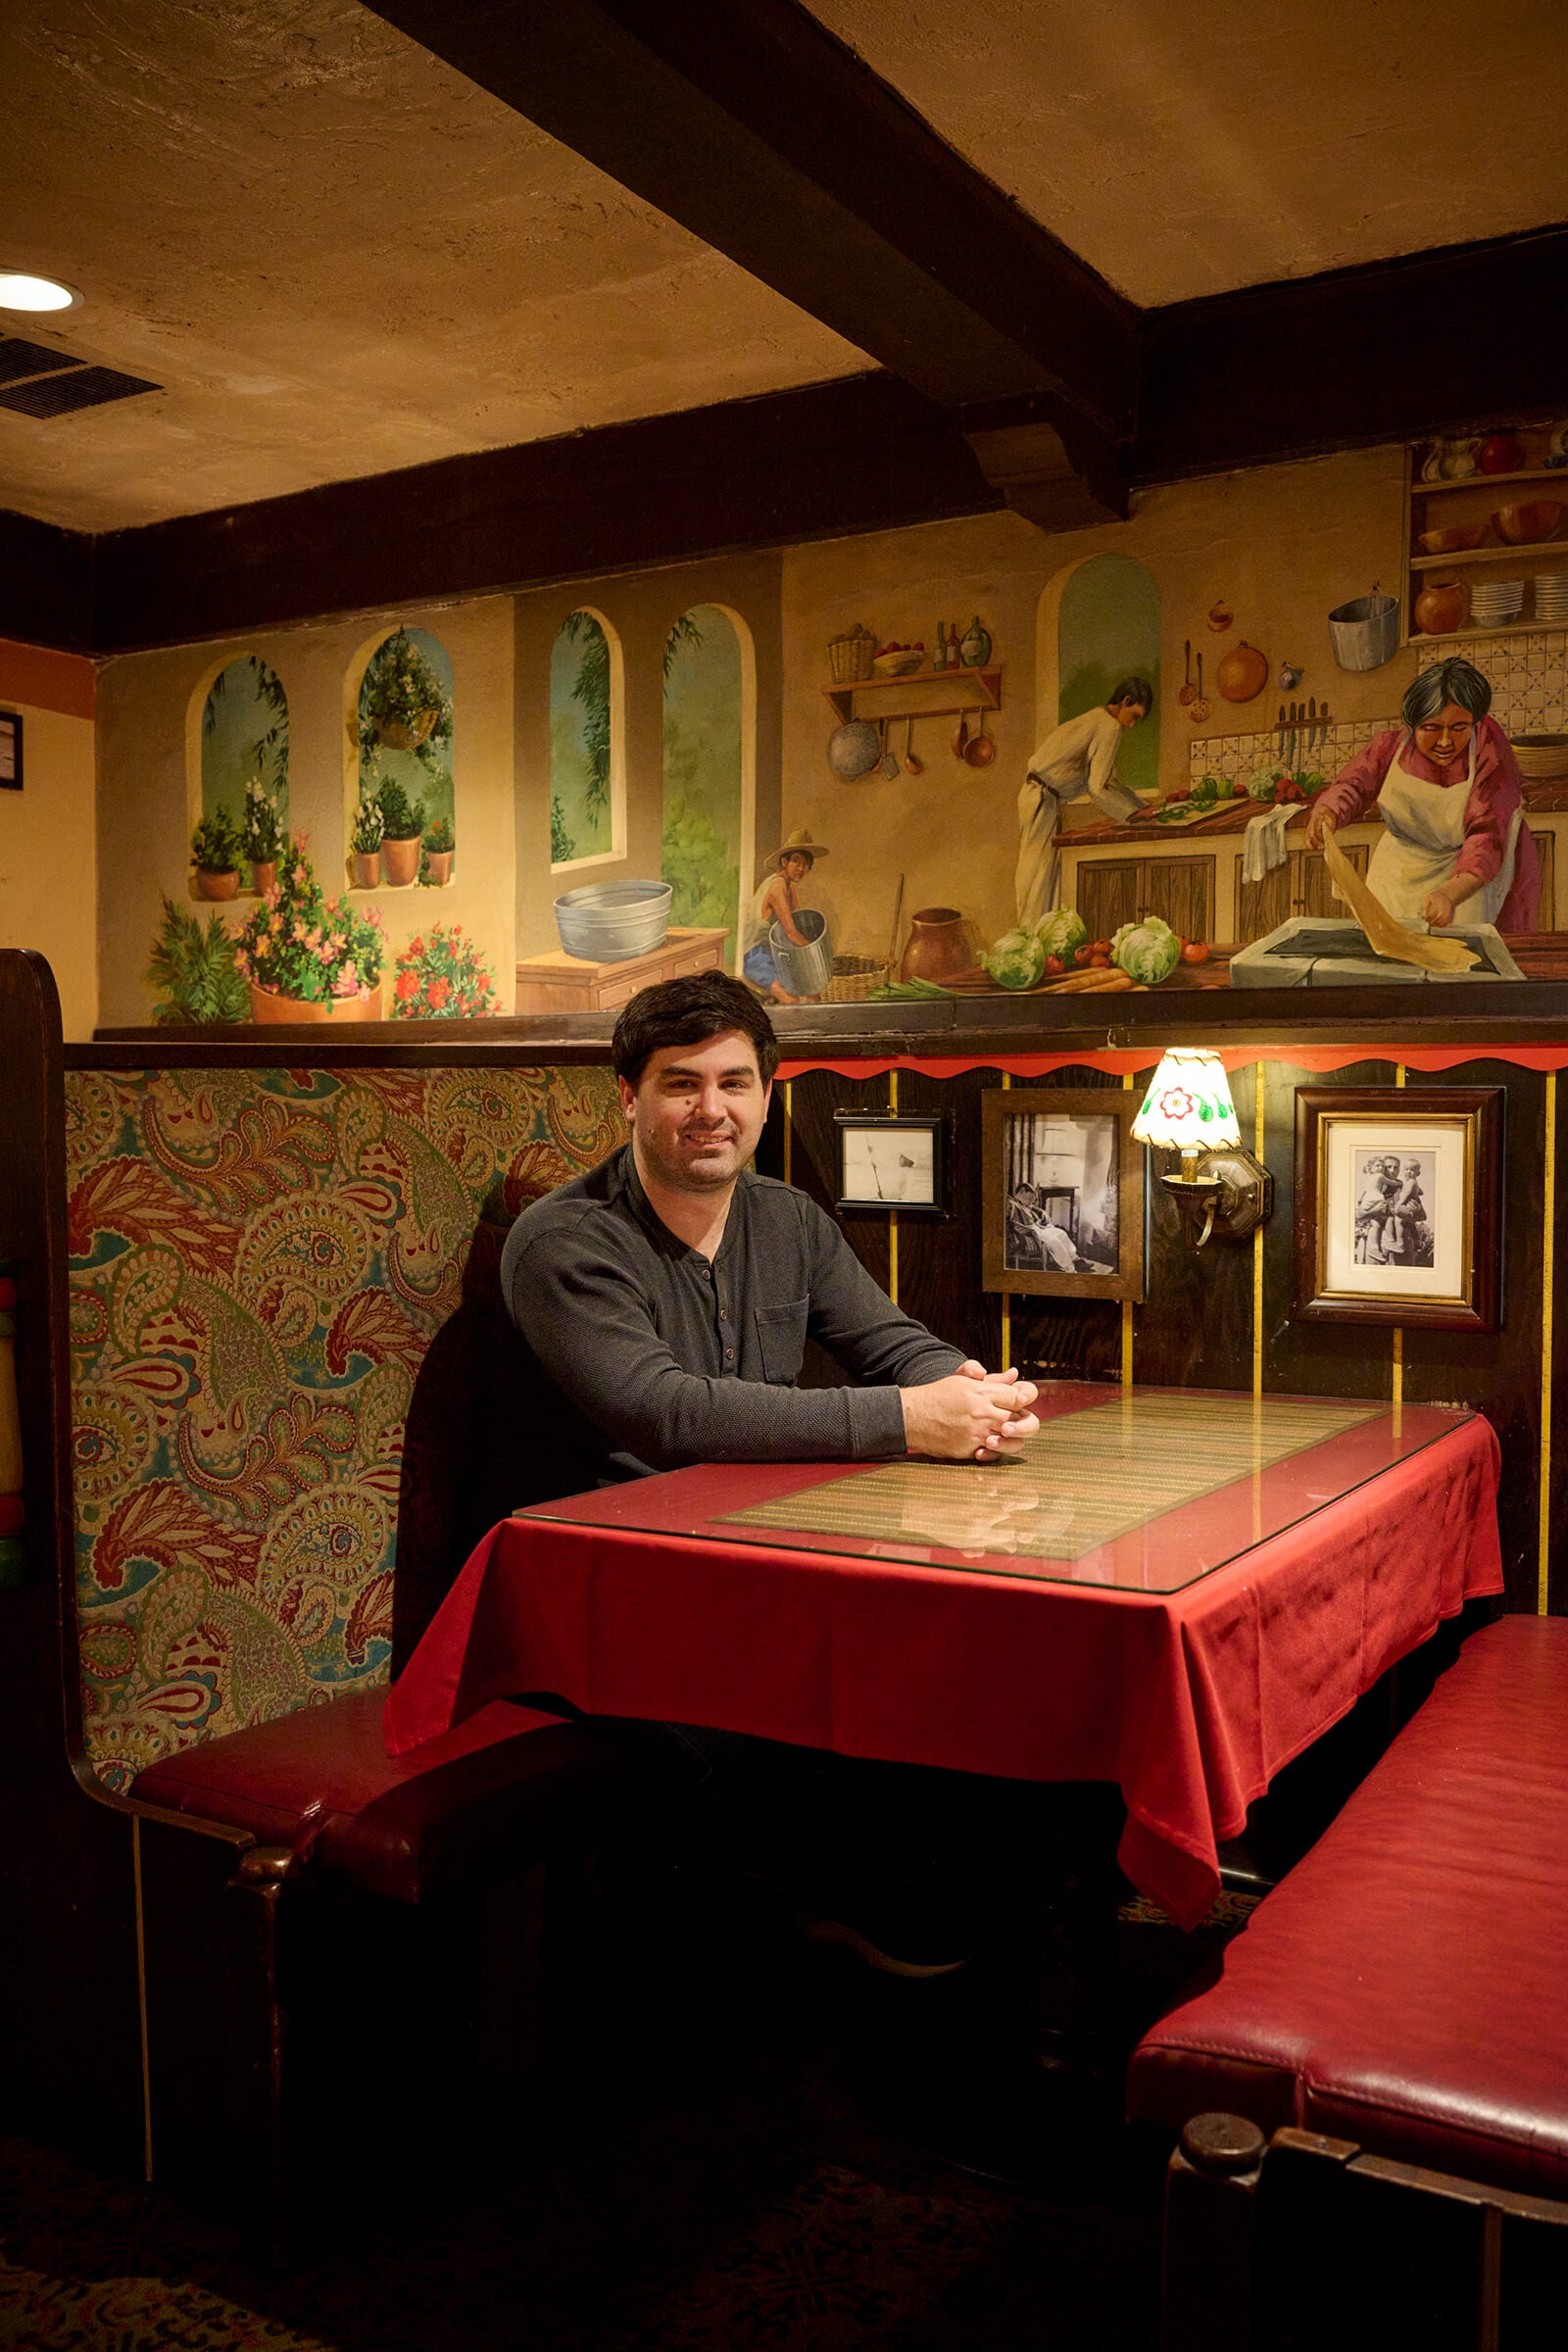 Man in a gray shirt sitting in a red booth in front of a mural on the wall above.